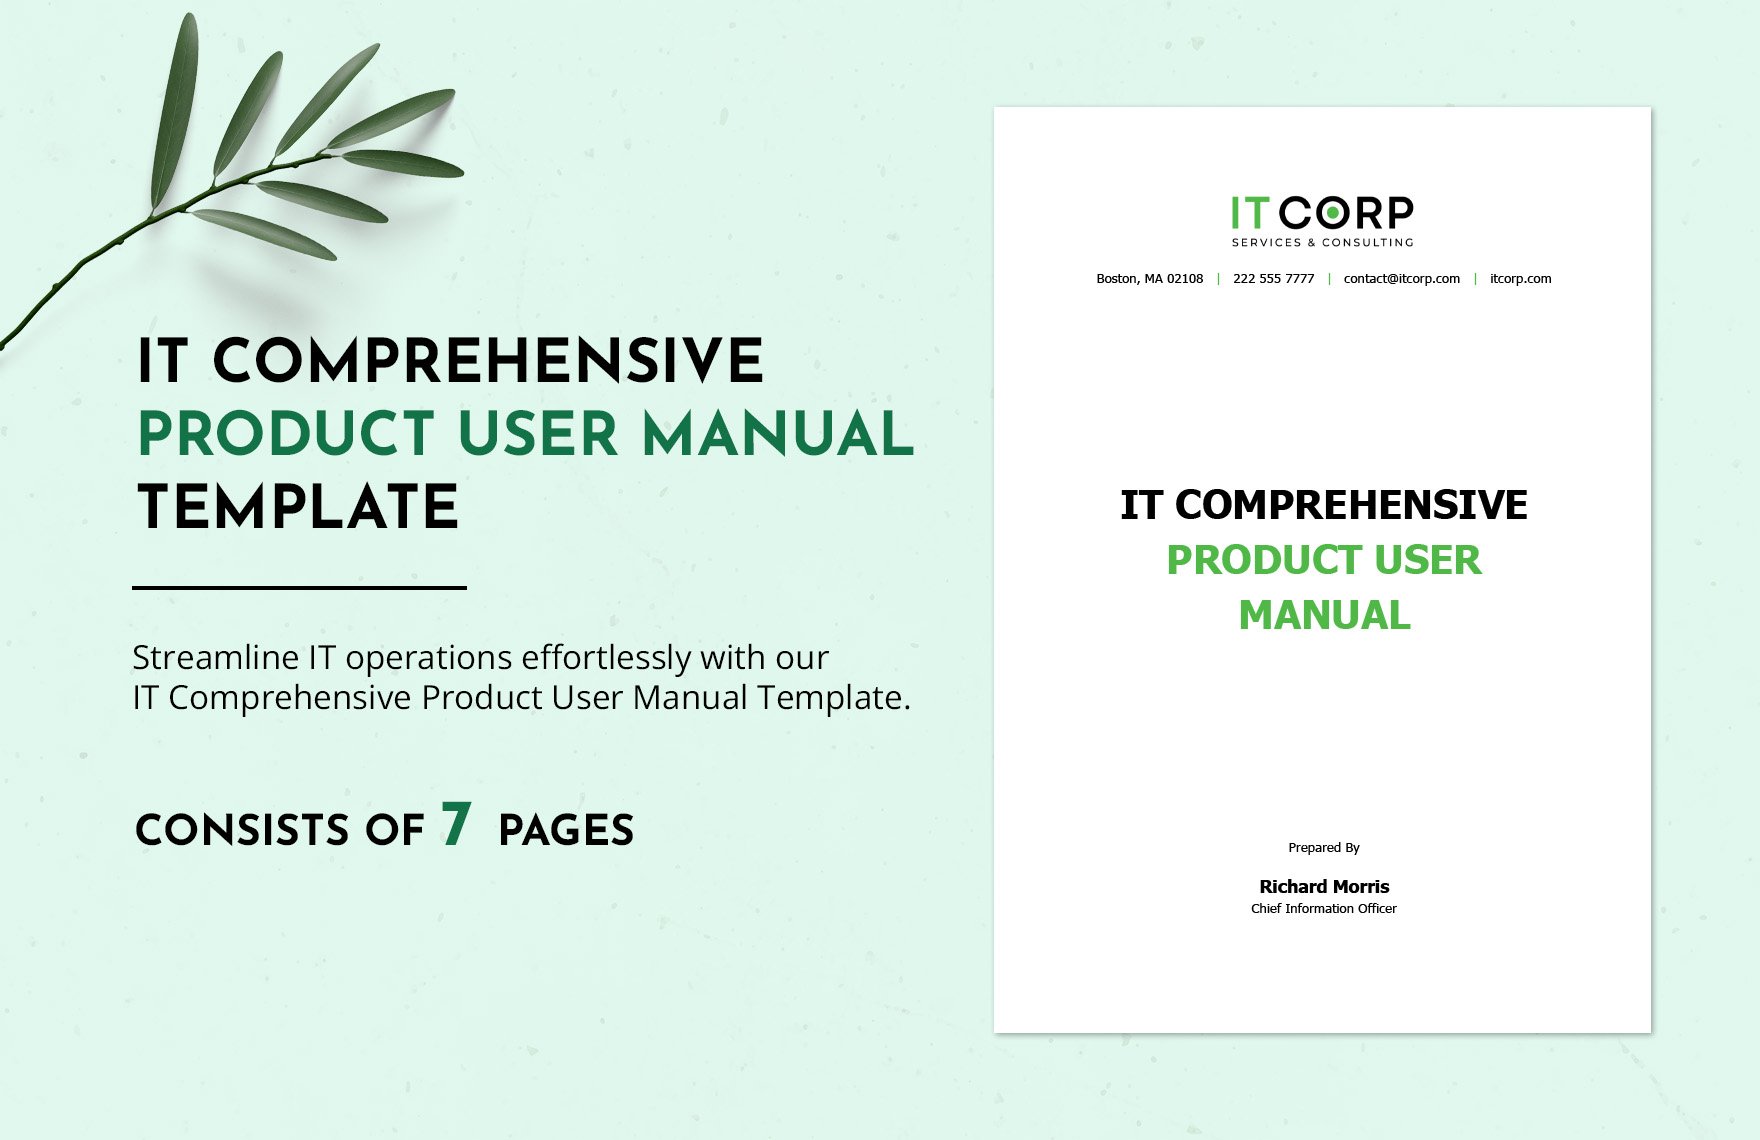 IT Comprehensive Product User Manual Template